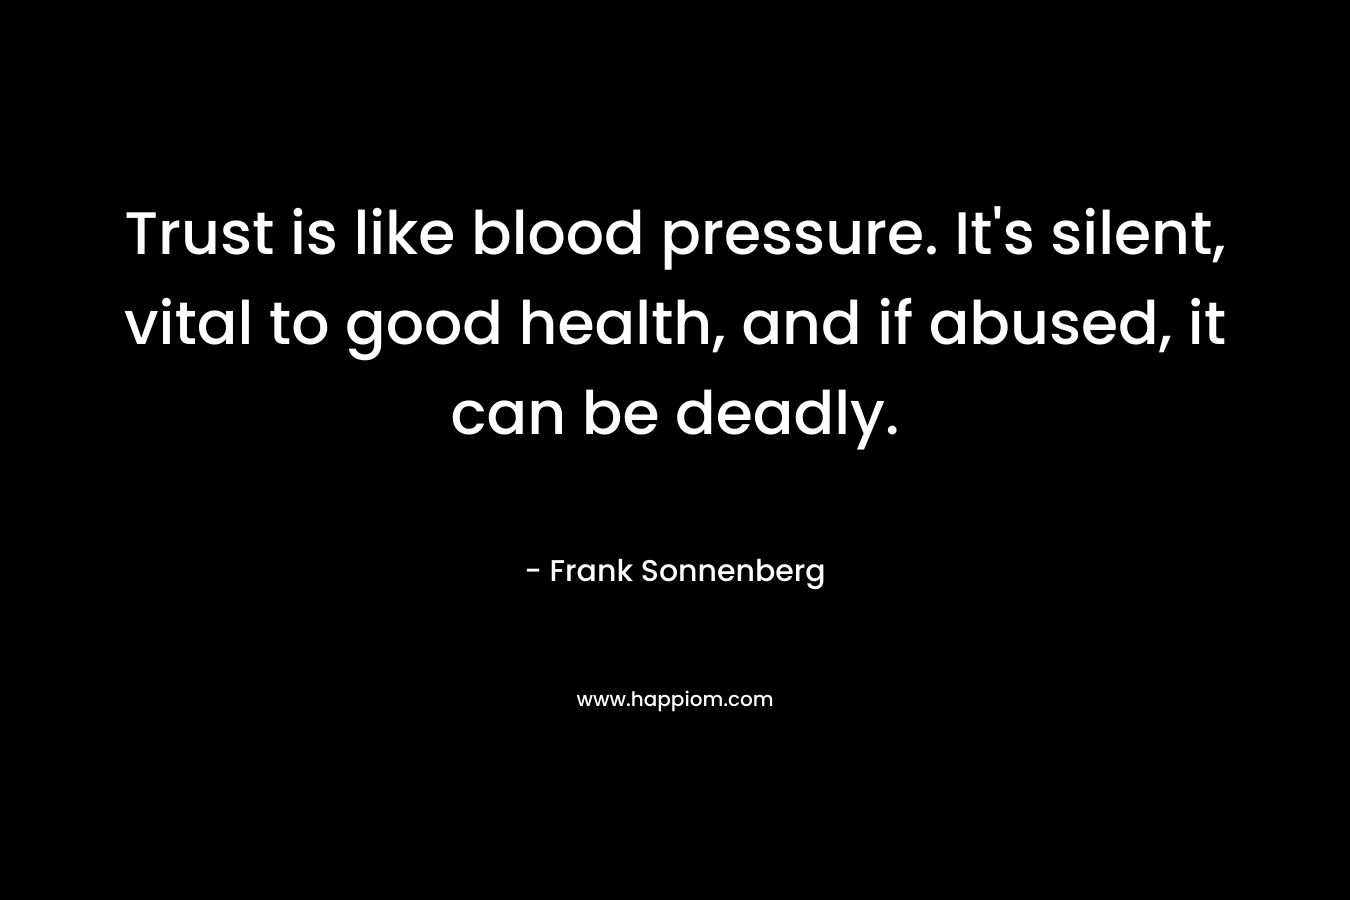 Trust is like blood pressure. It's silent, vital to good health, and if abused, it can be deadly.